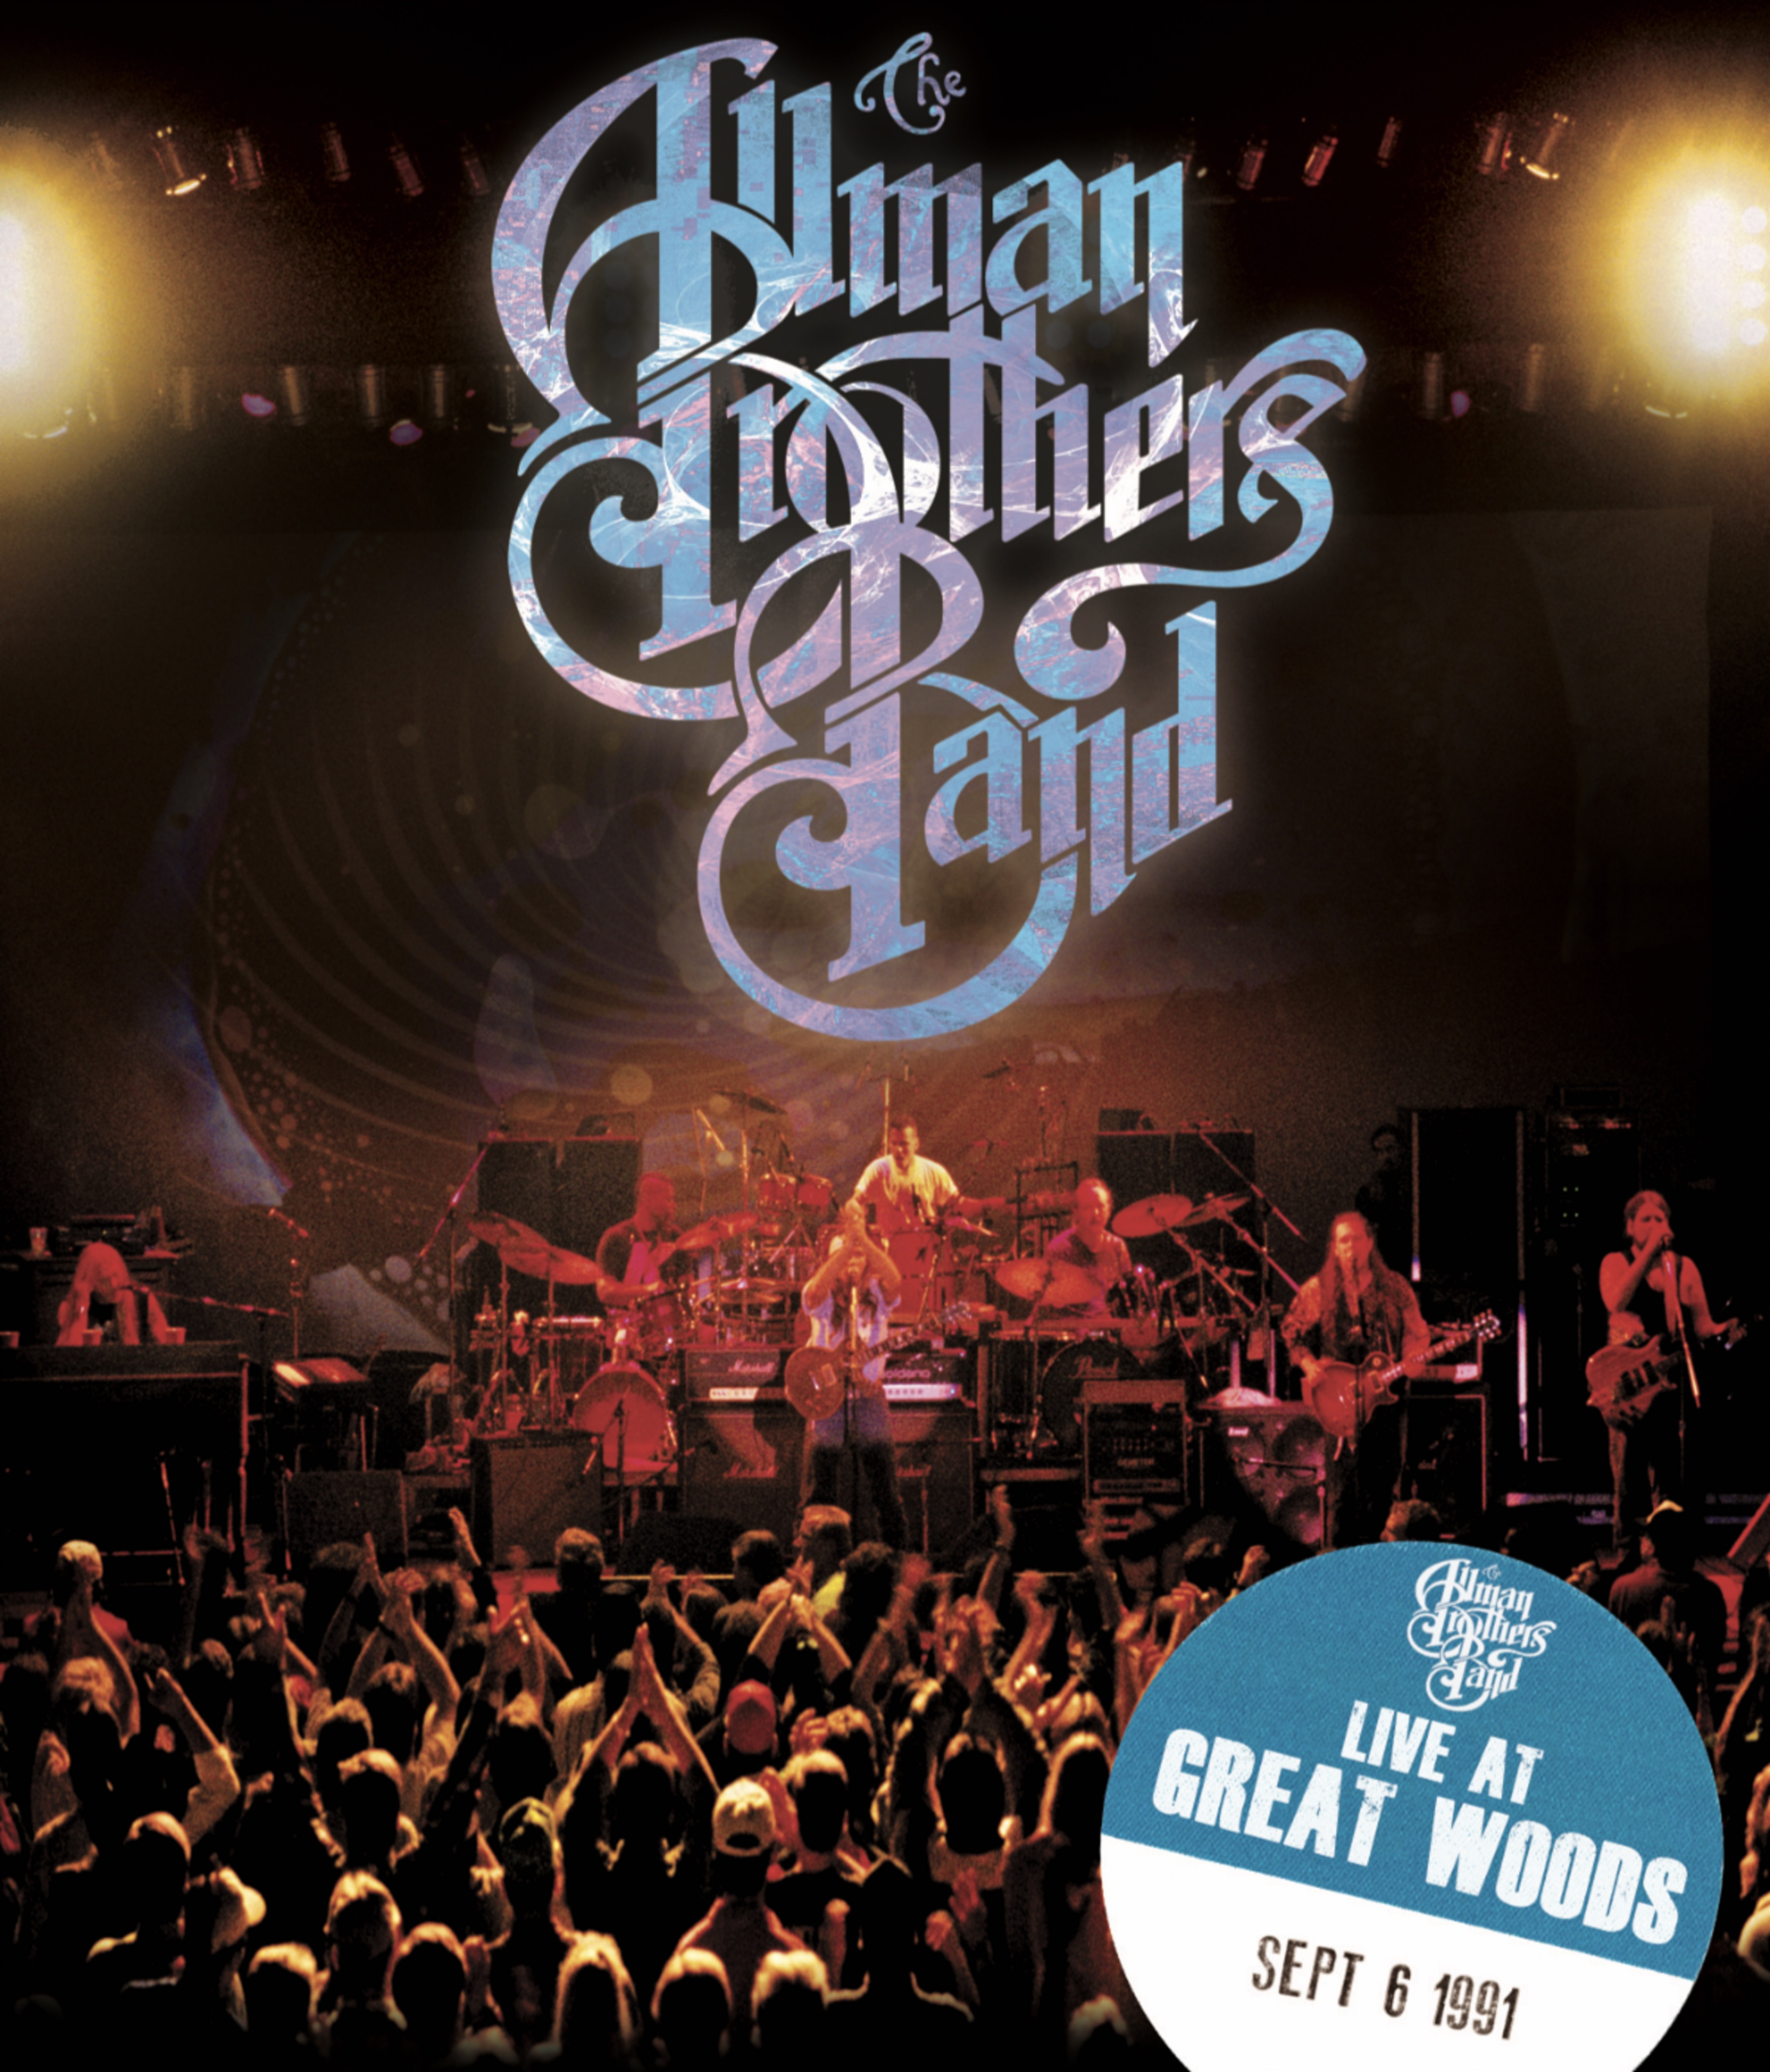 The Allman Brothers Band: Live At Great Woods 1991